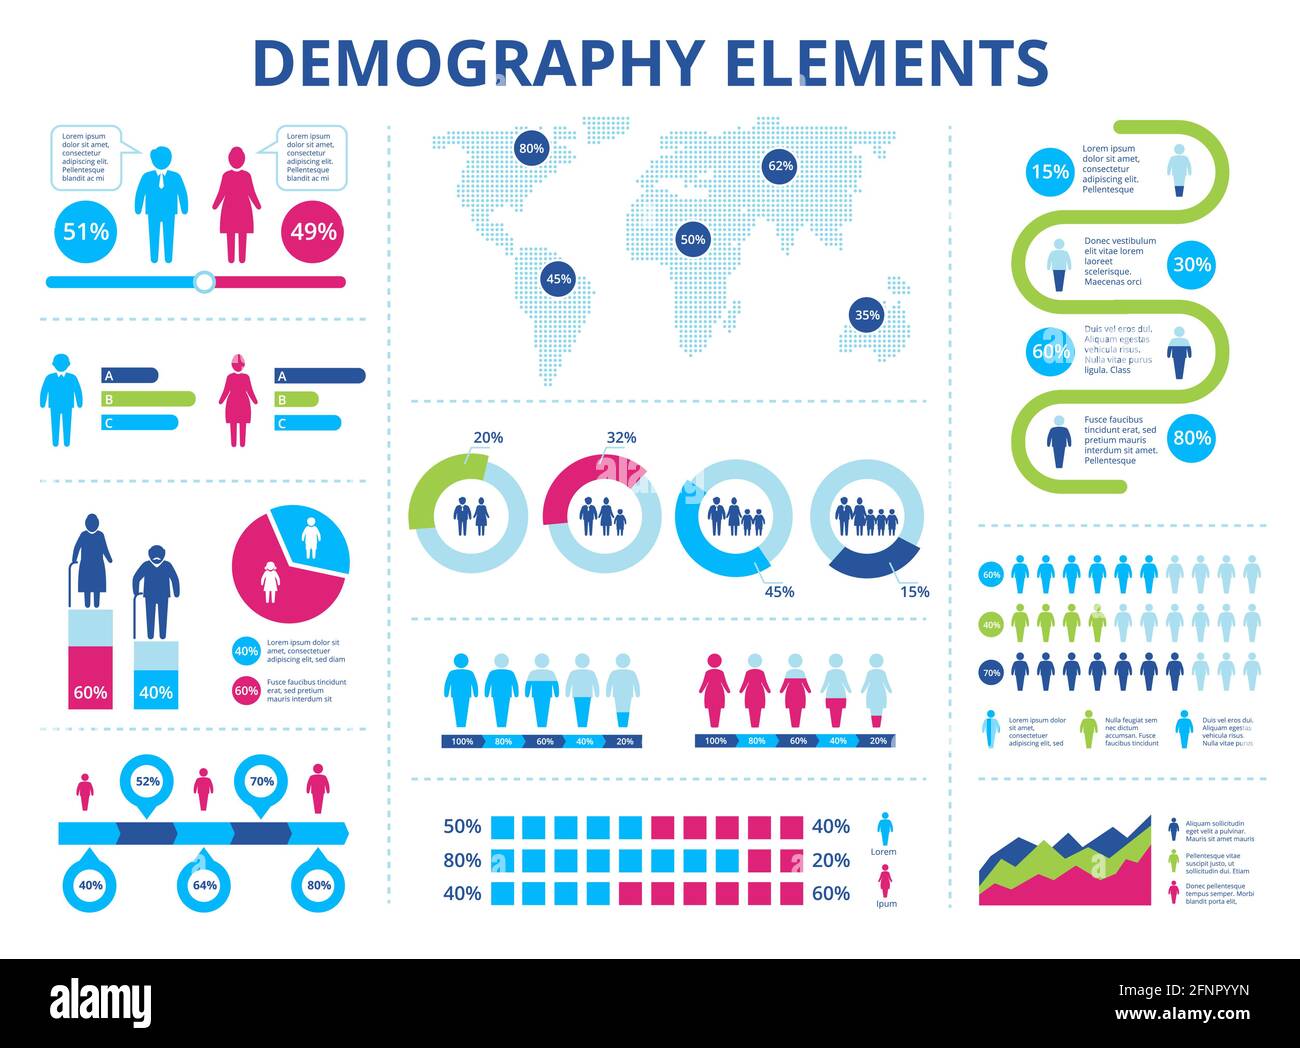 Population Infographic Men And Women Demographic Statistics With Pie Charts Graphs Timelines